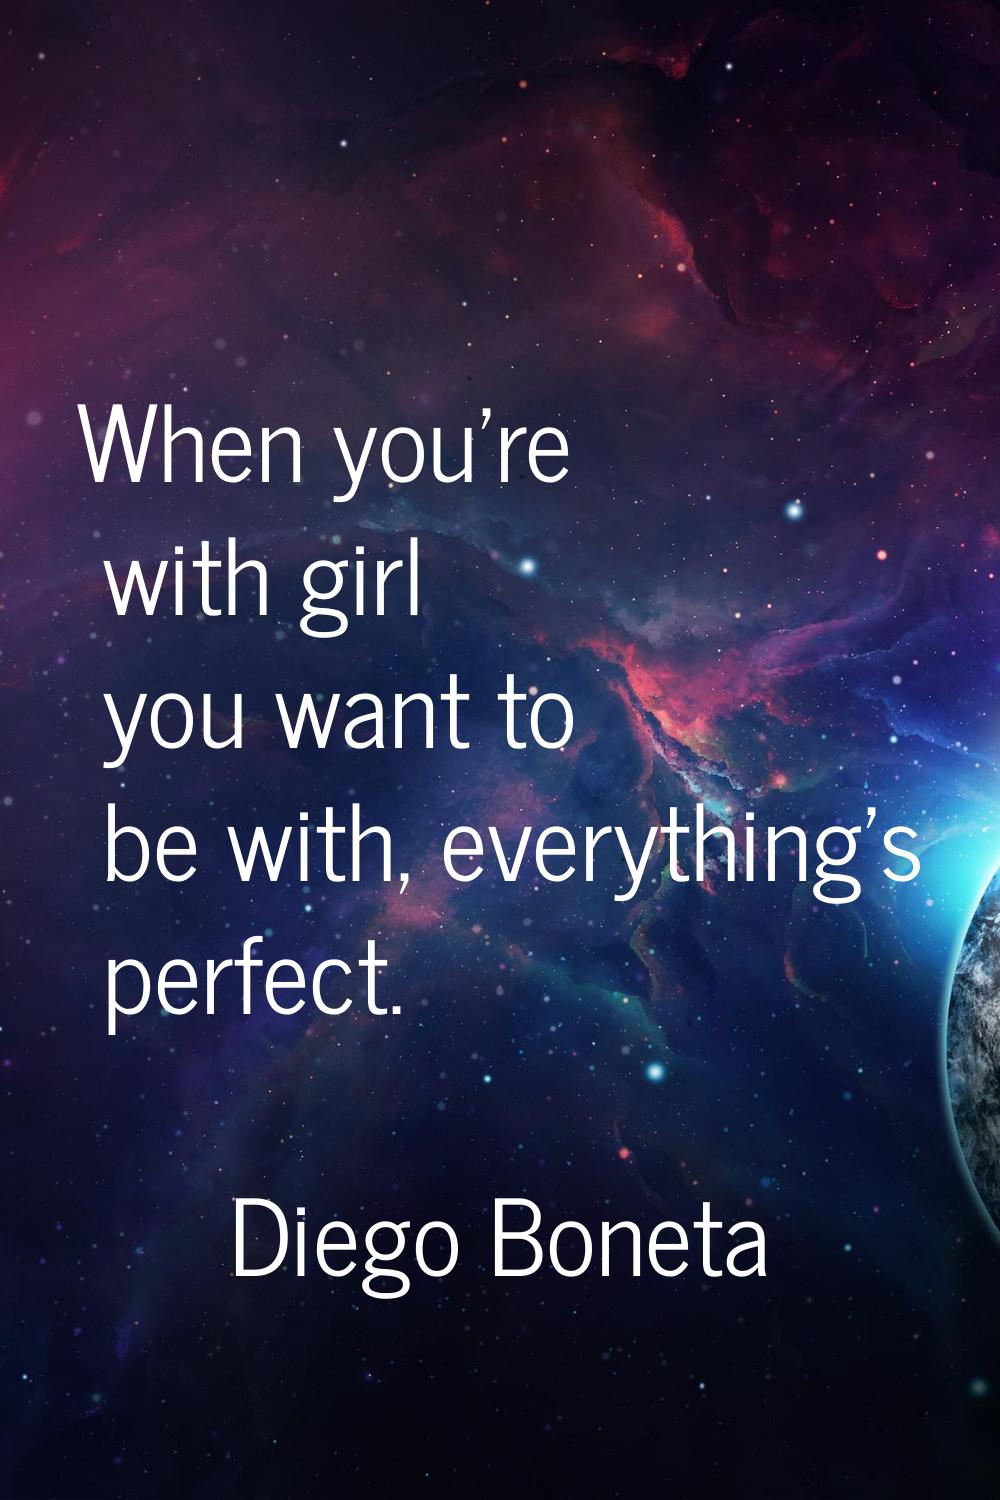 When you're with girl you want to be with, everything's perfect.